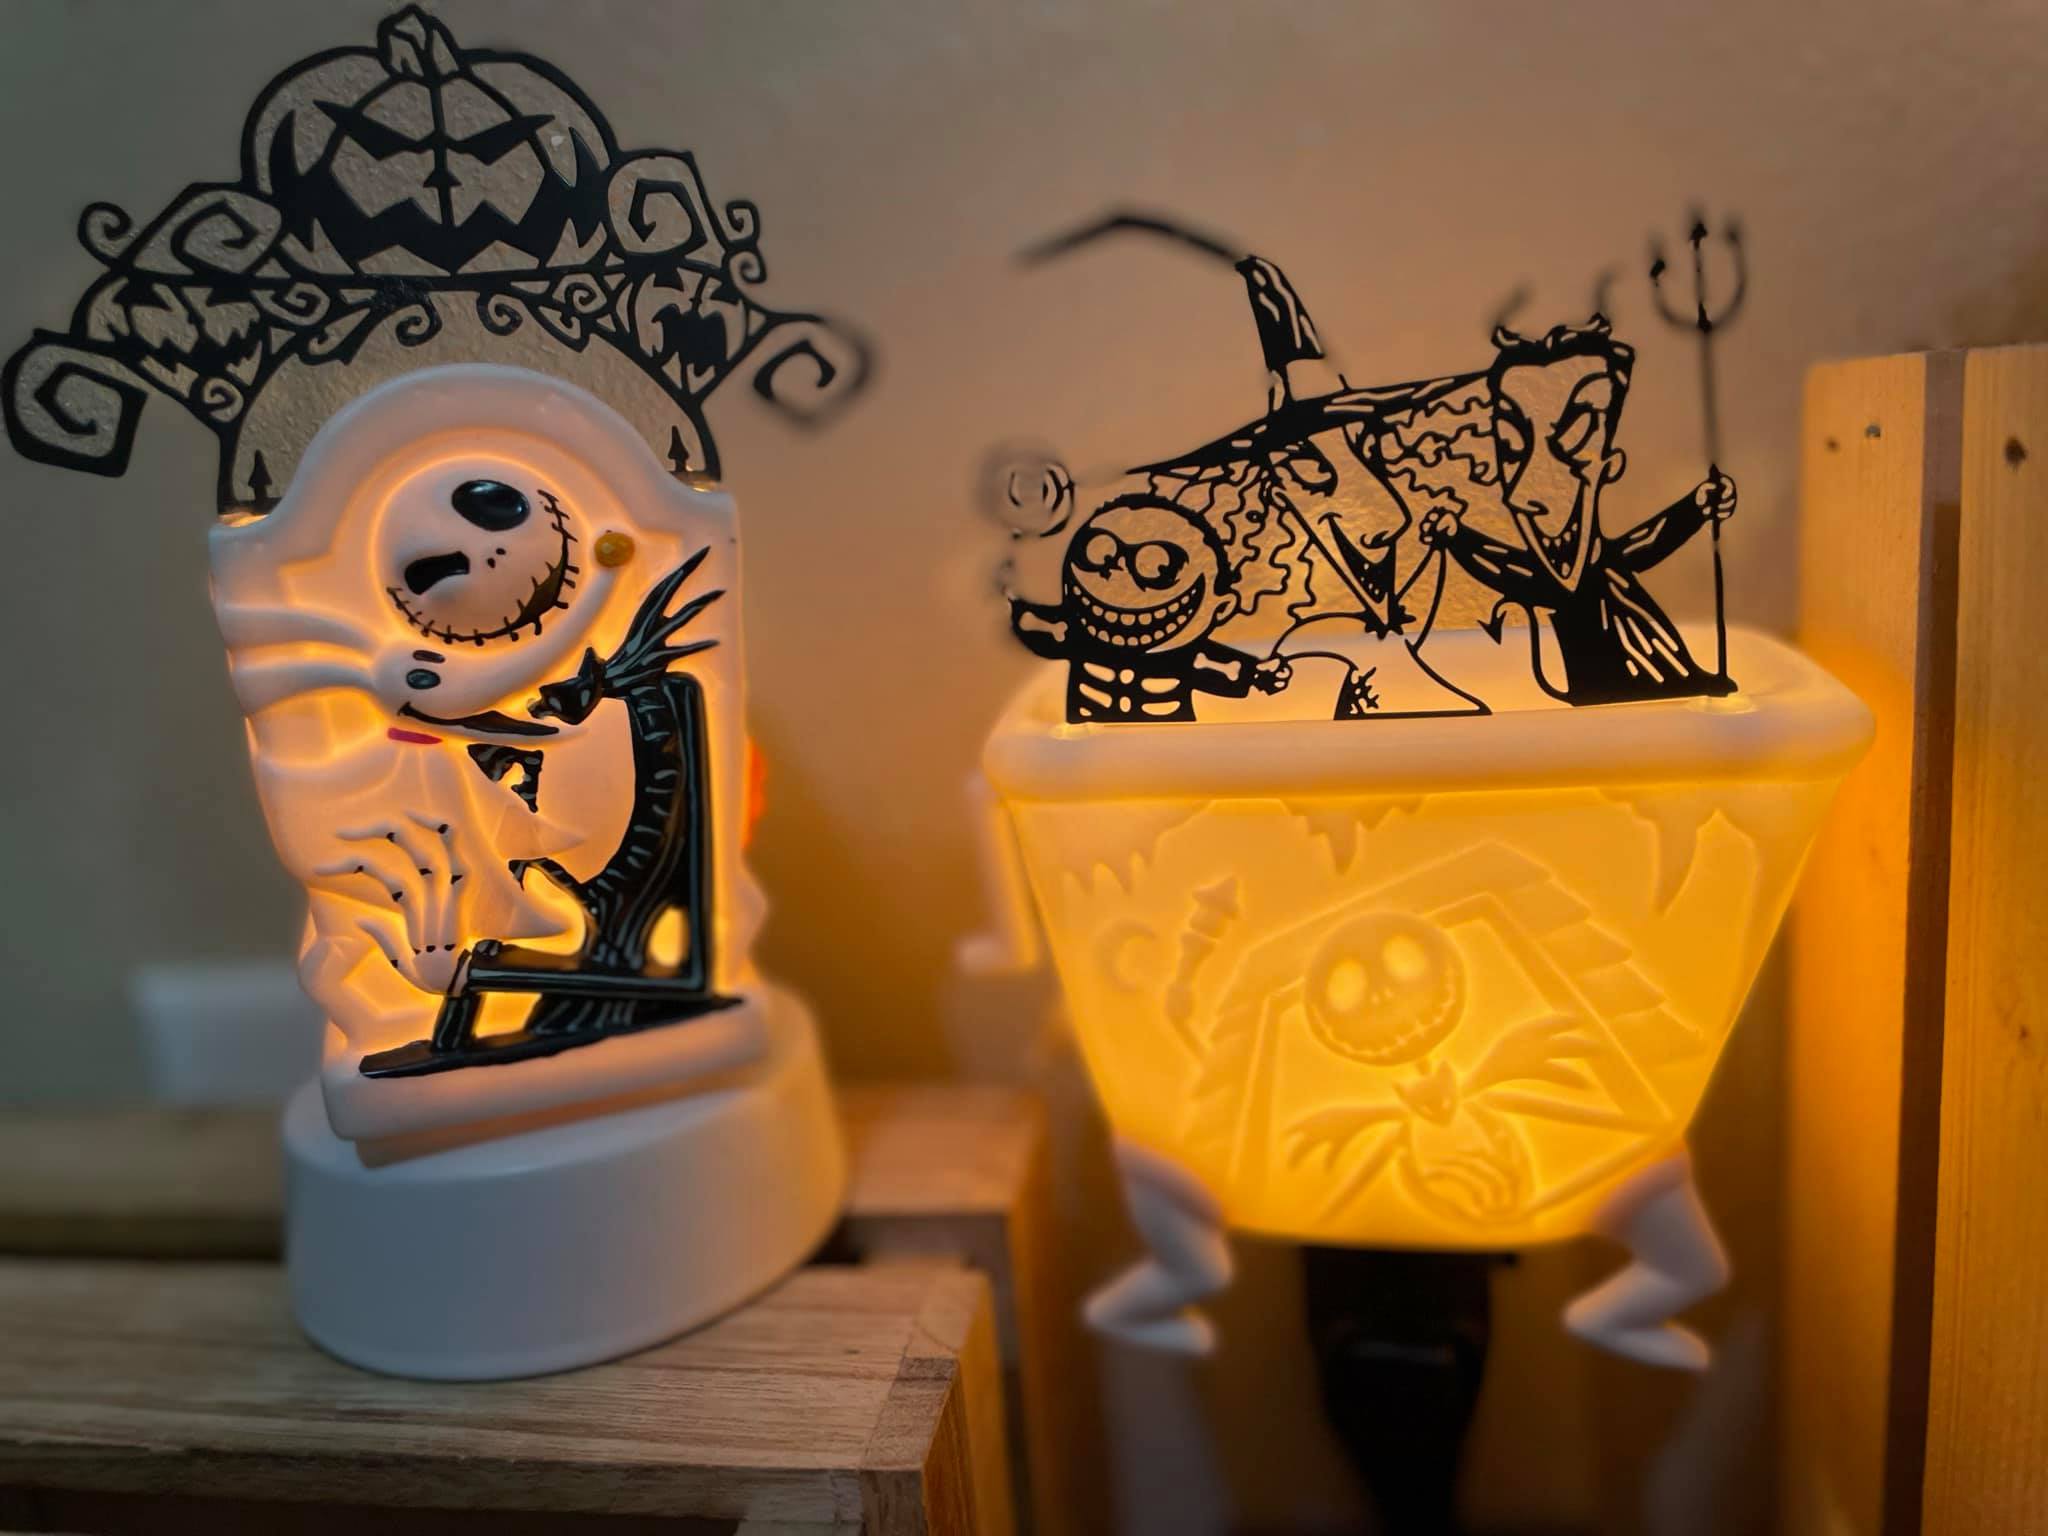 The Nightmare Before Christmas Lock, Shock, and Barrel Scentsy Mini